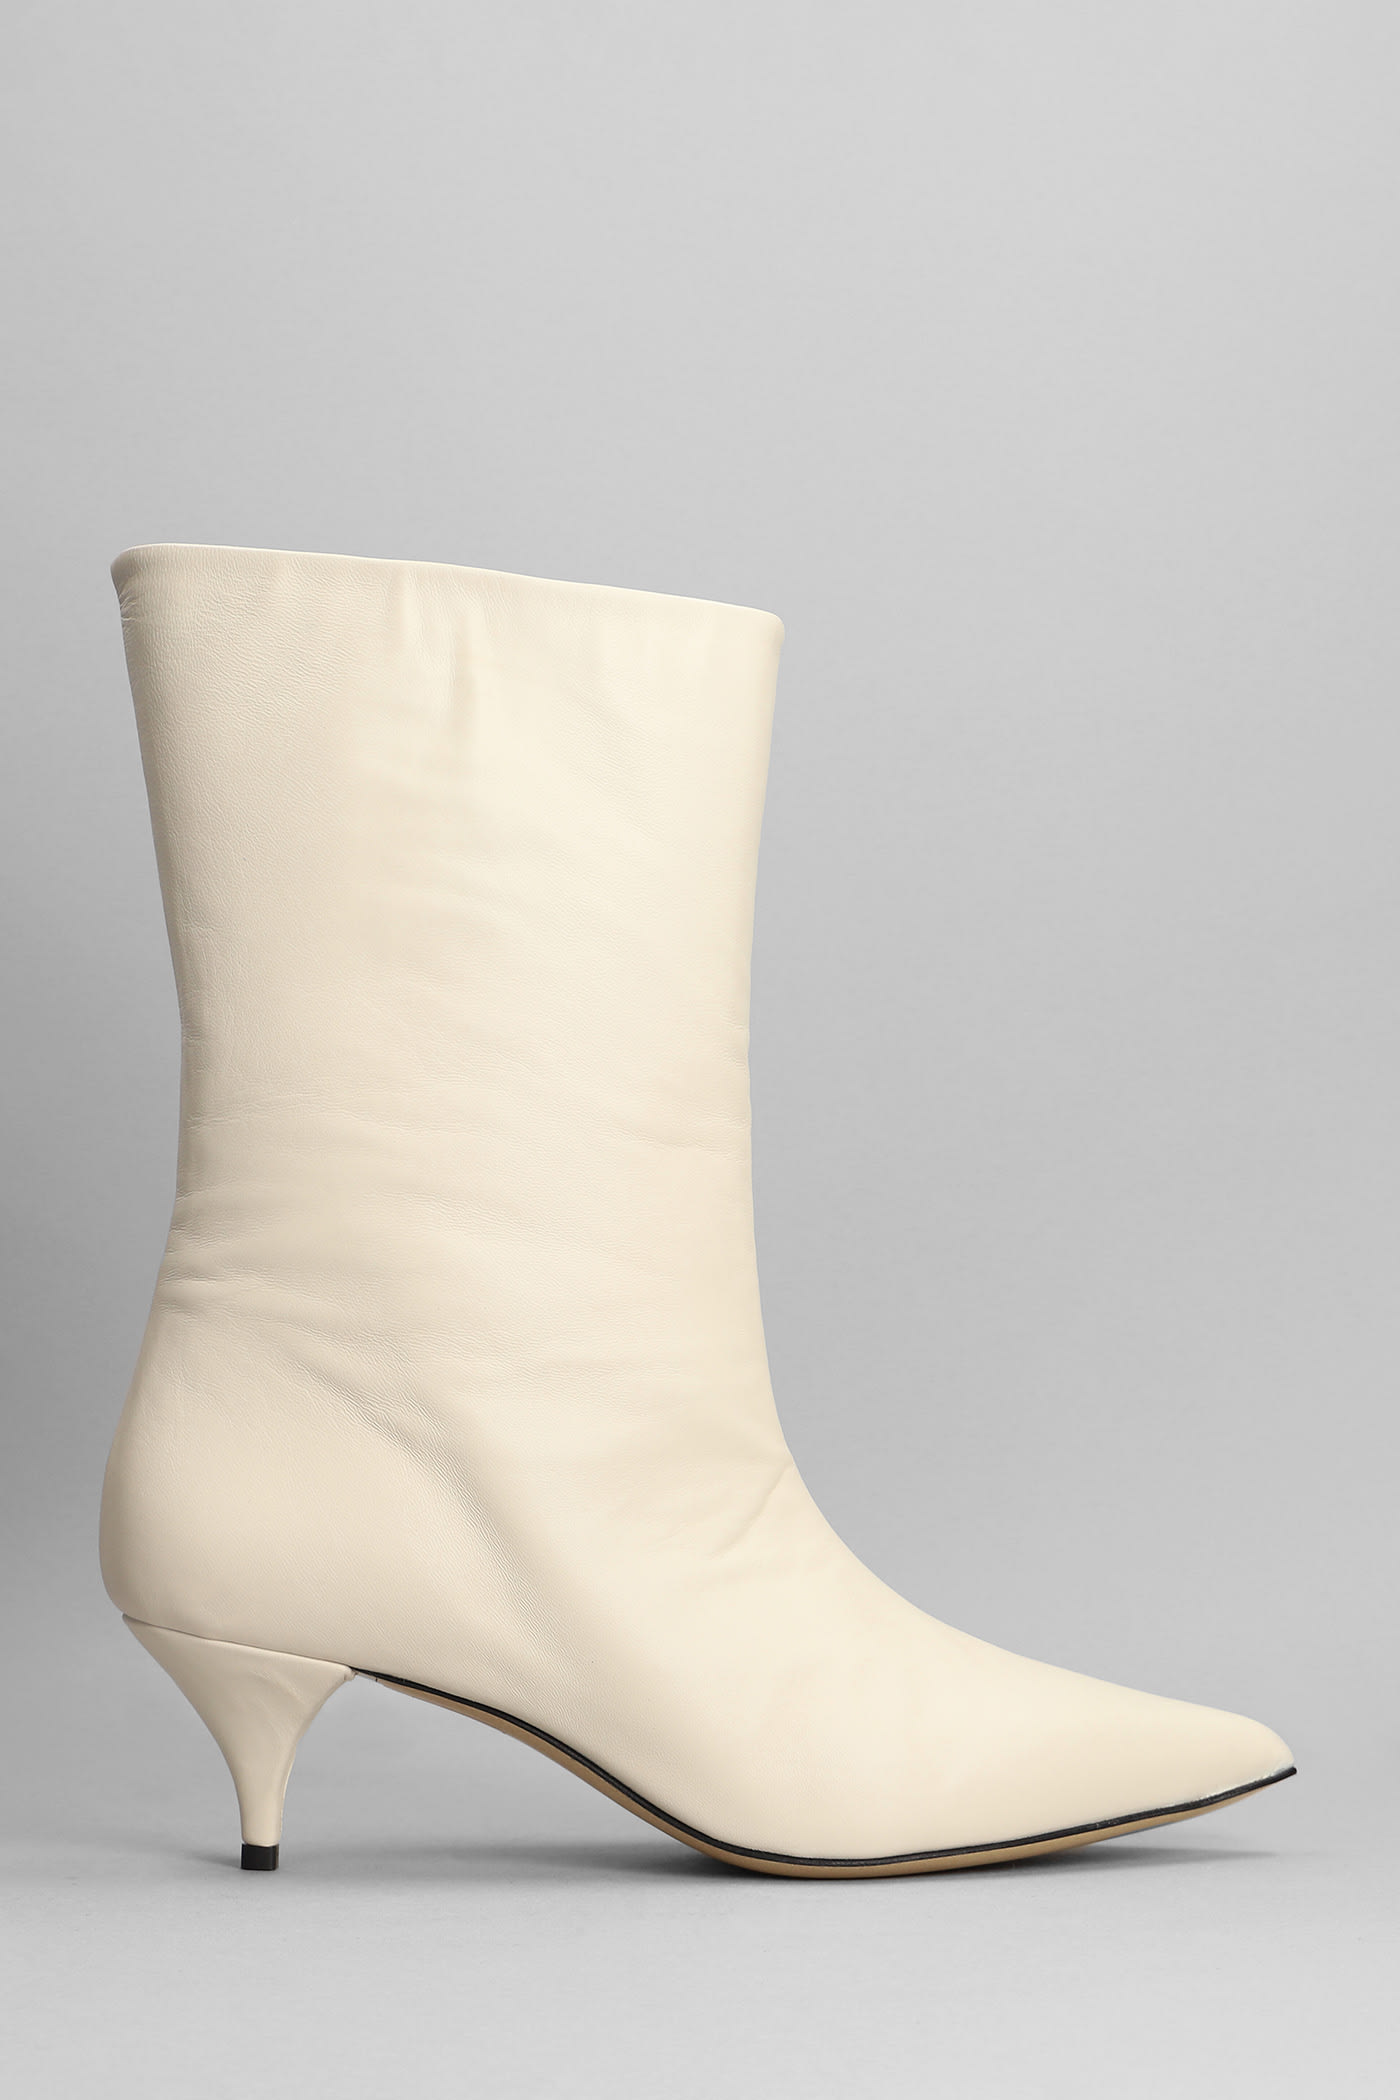 Alchimia High Heels Ankle Boots In White Leather